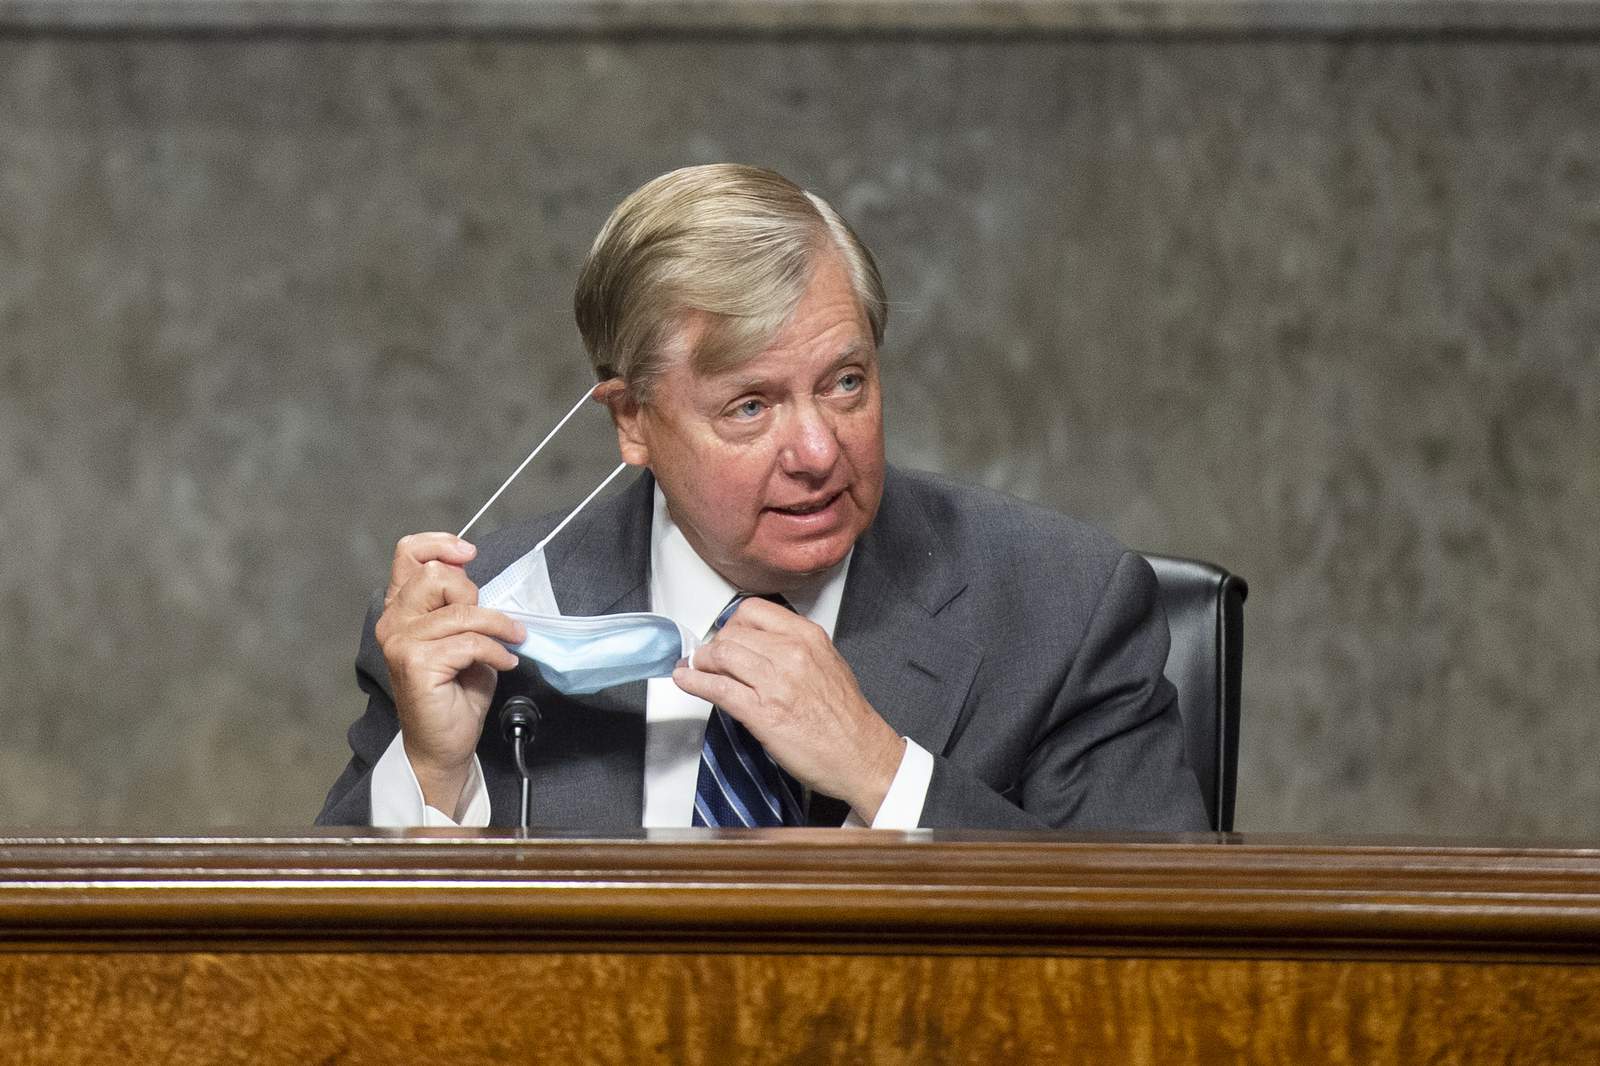 South Carolina's Graham taking on 3 Republican challengers